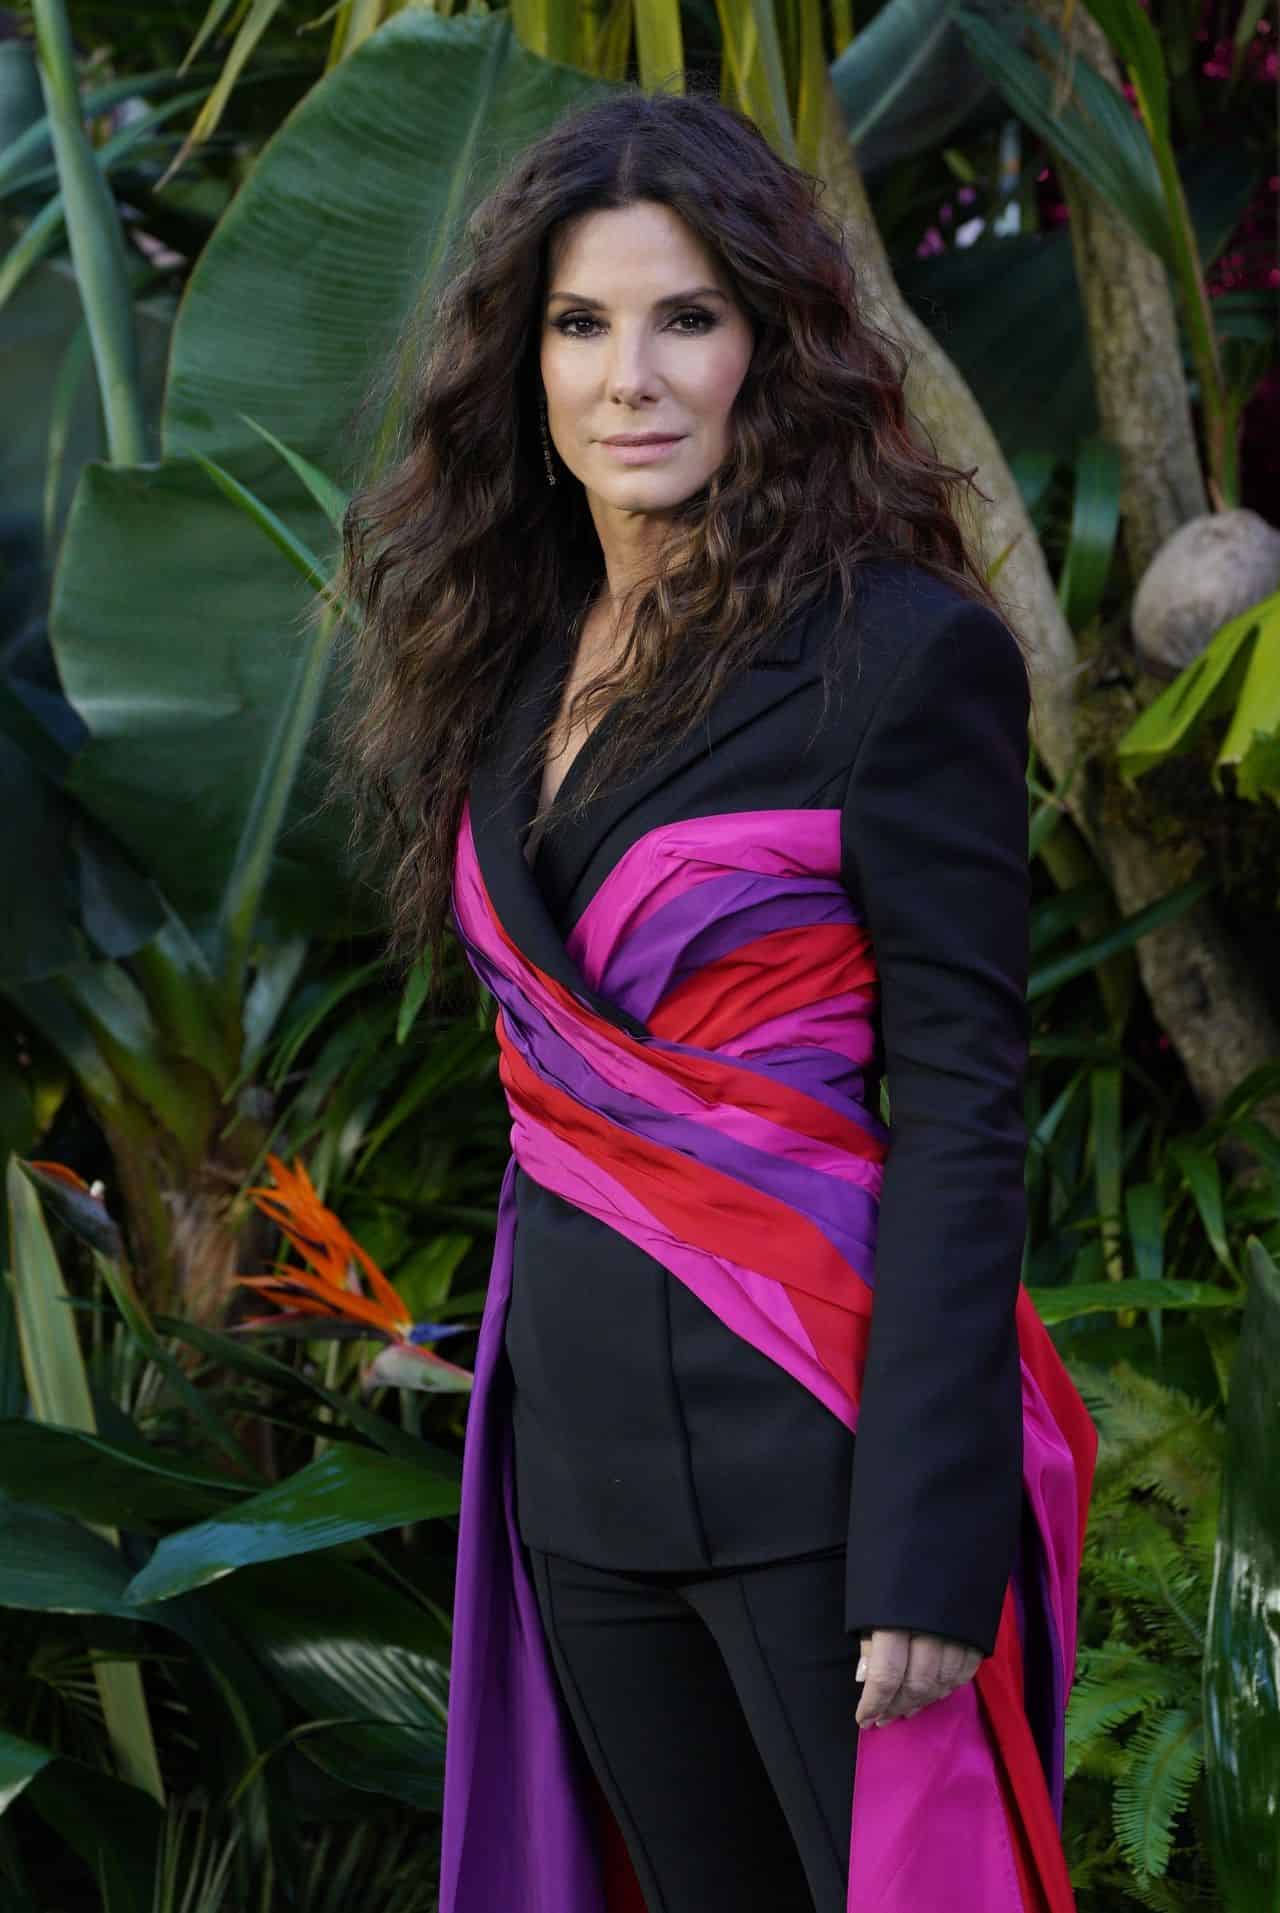 Sandra Bullock in a Chic Pantsuit at the "The Lost City" Premiere in the UK